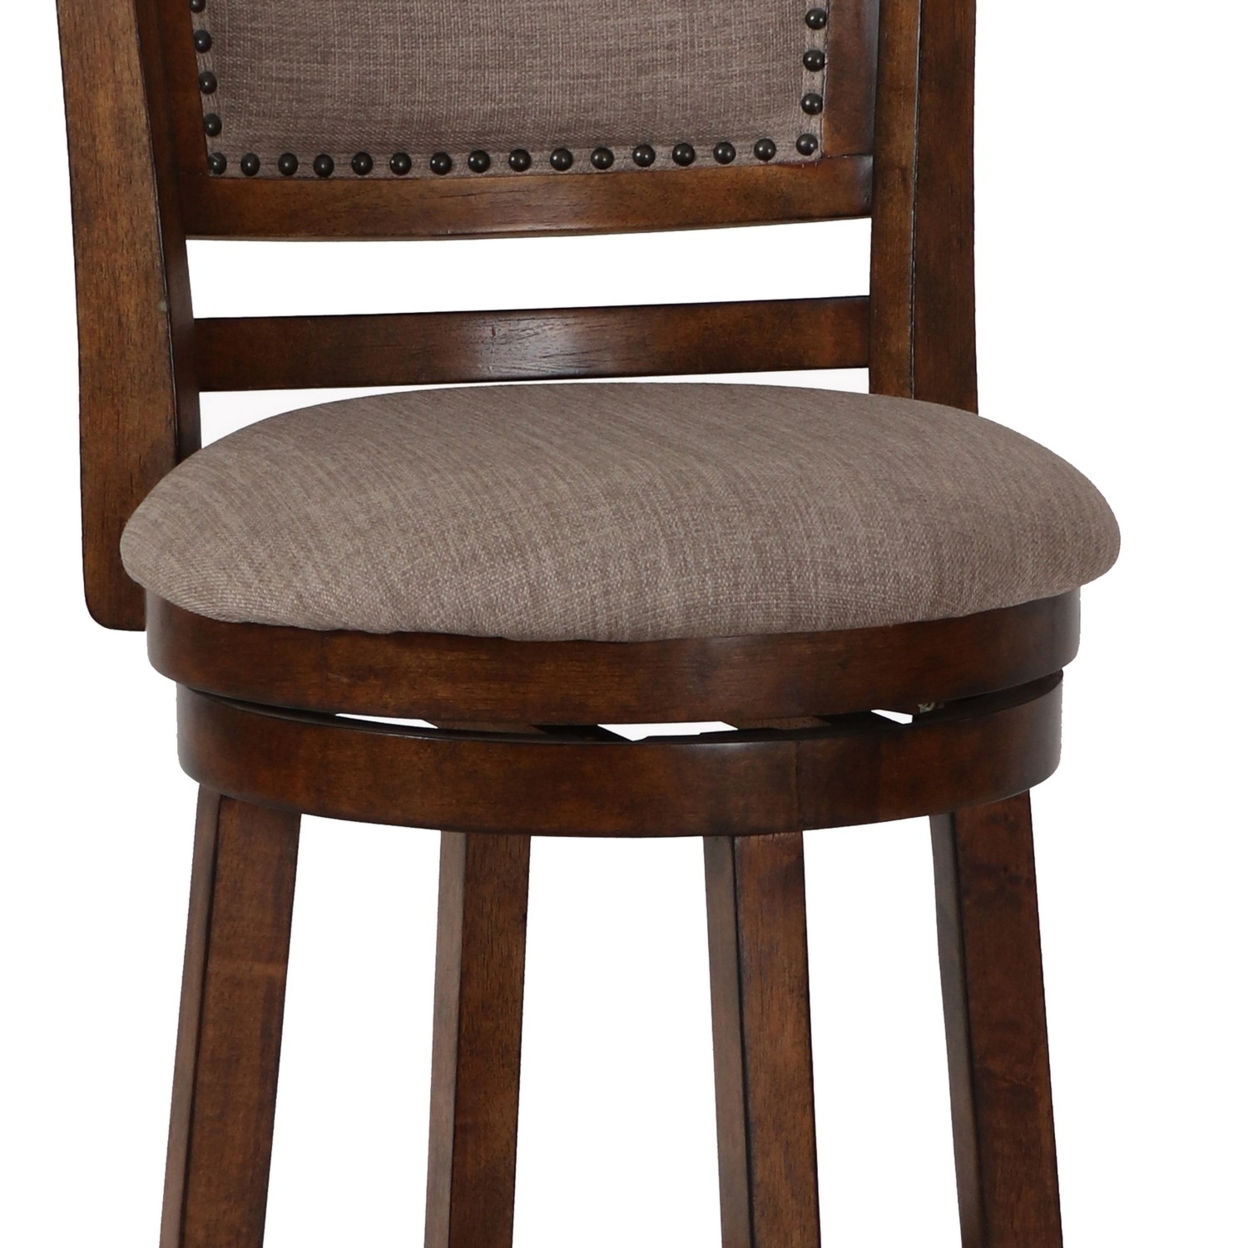 Curved Swivel Counter Stool With Fabric Padded Seating, Brown And Beige- Saltoro Sherpi